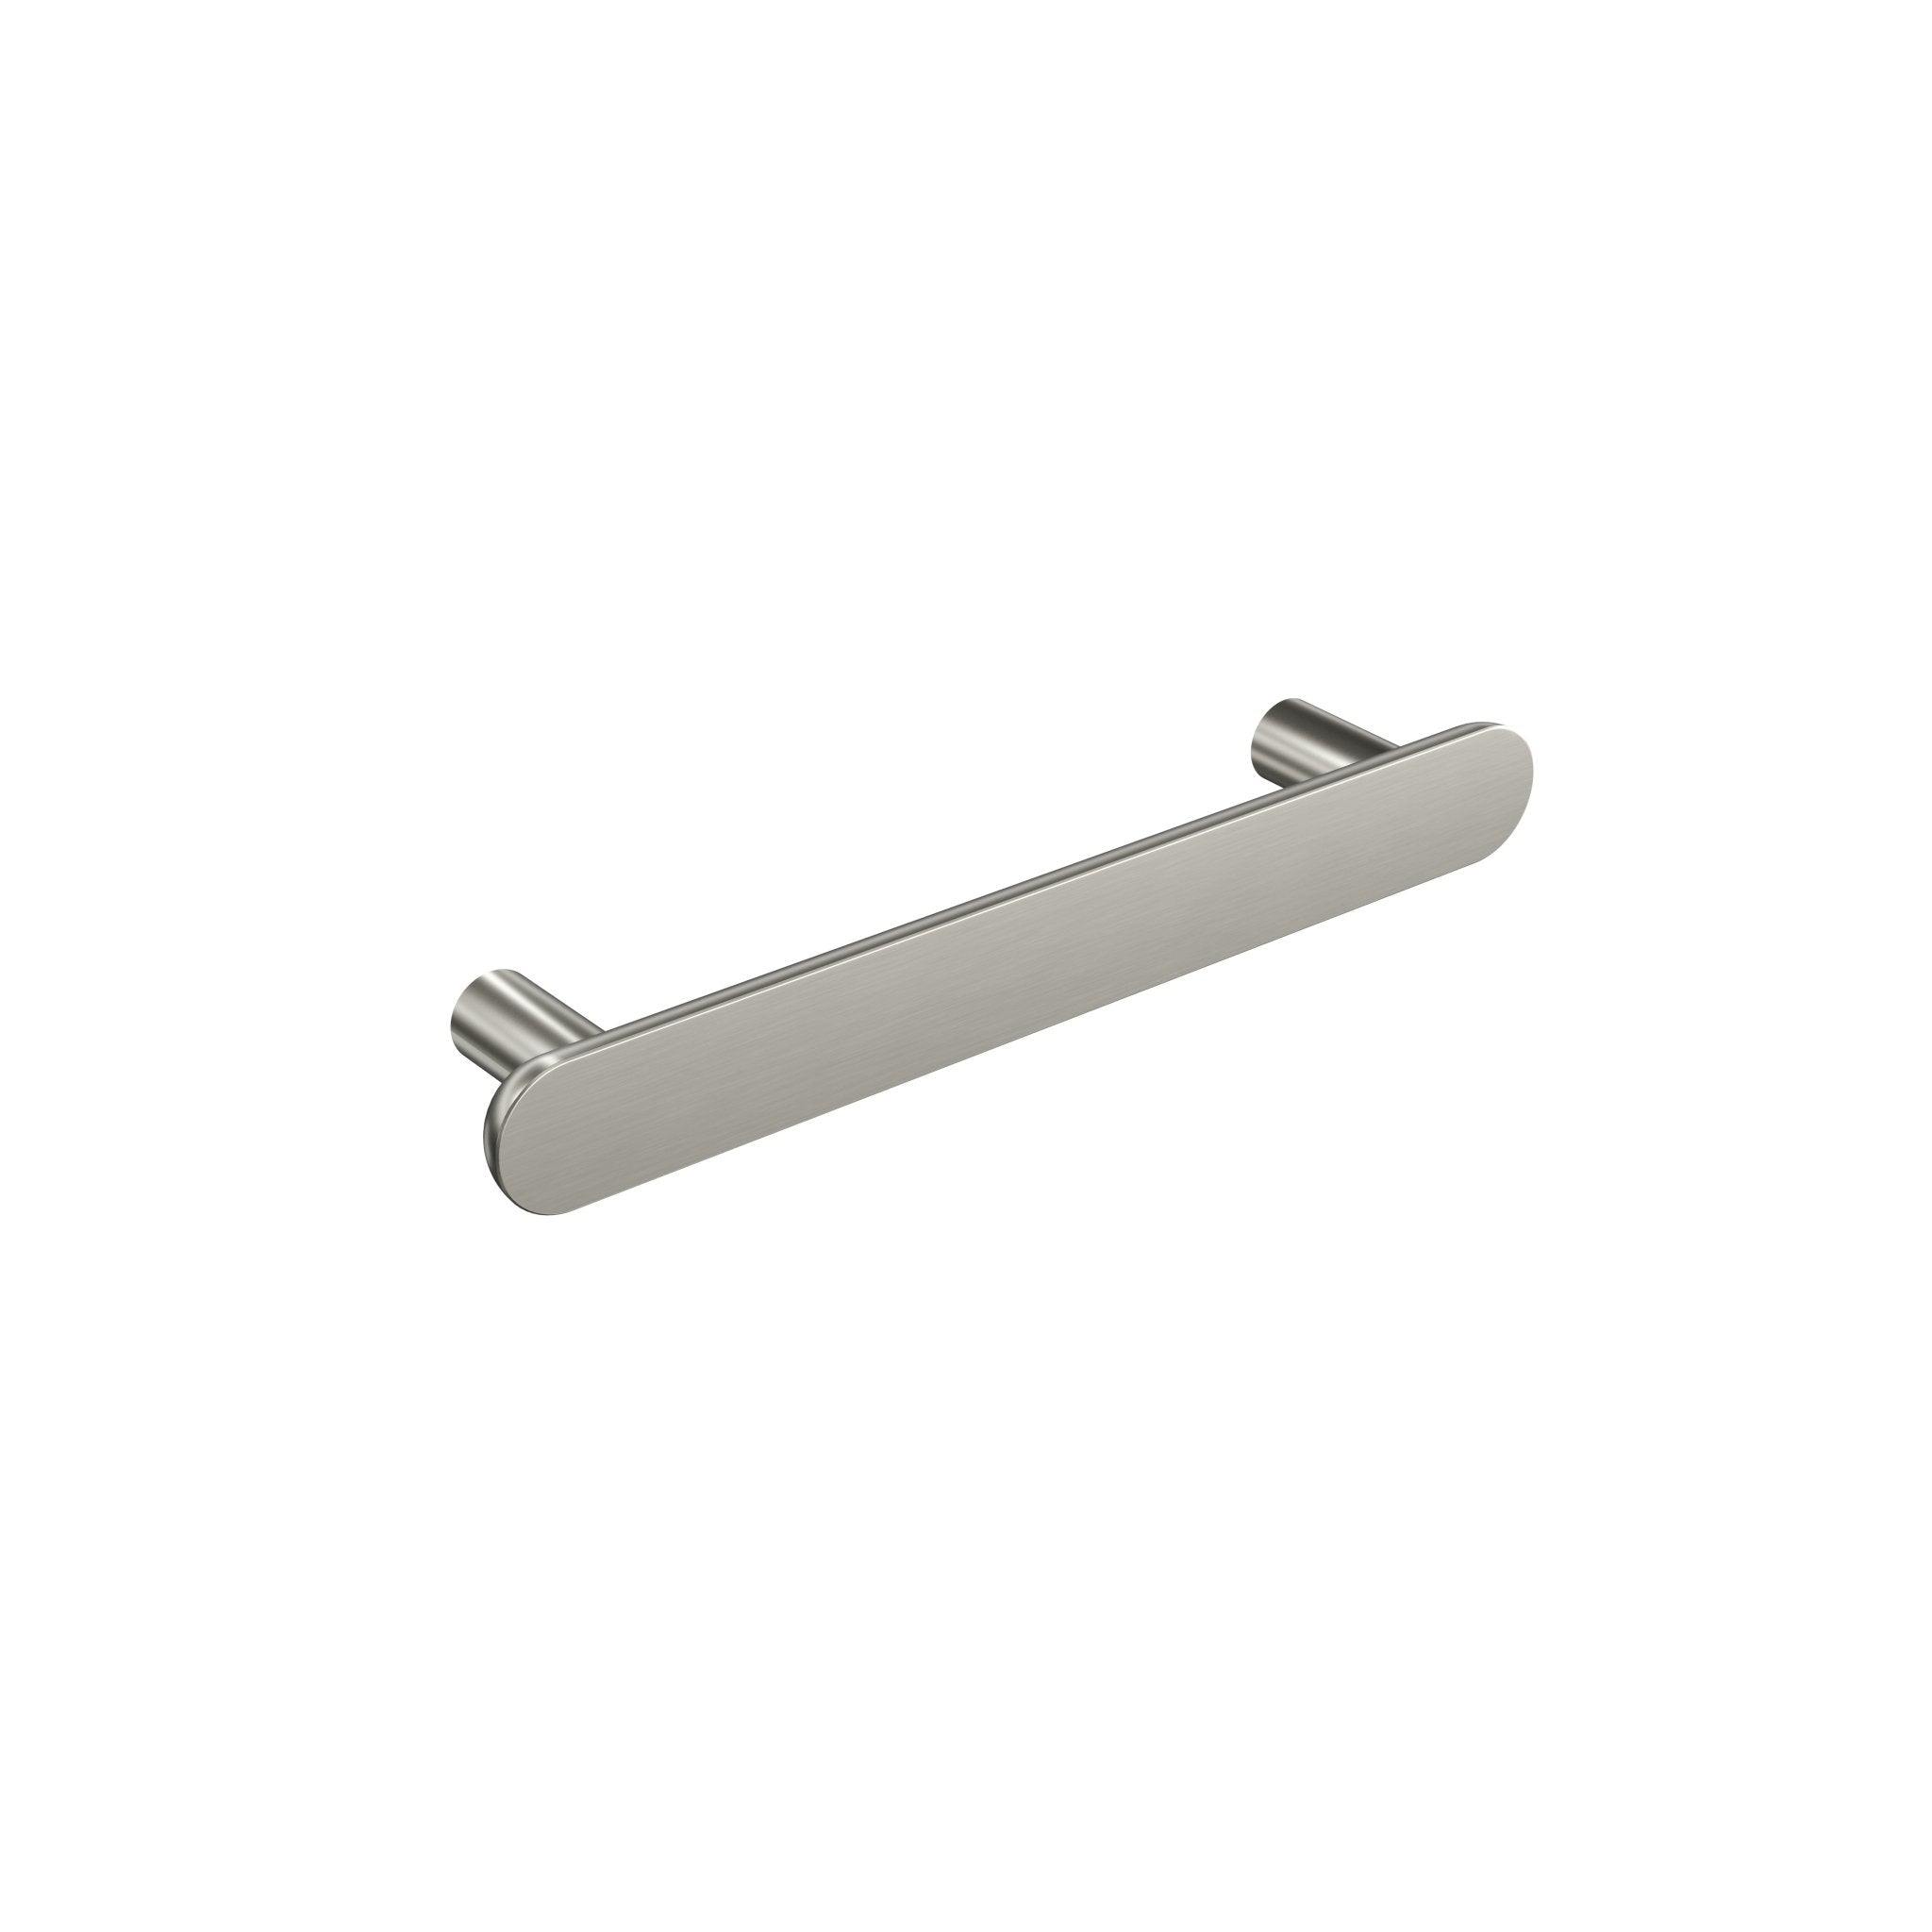 Bar Trim Pull Handle-Industrial Nickel-165mm-The Hairpin Leg Co.